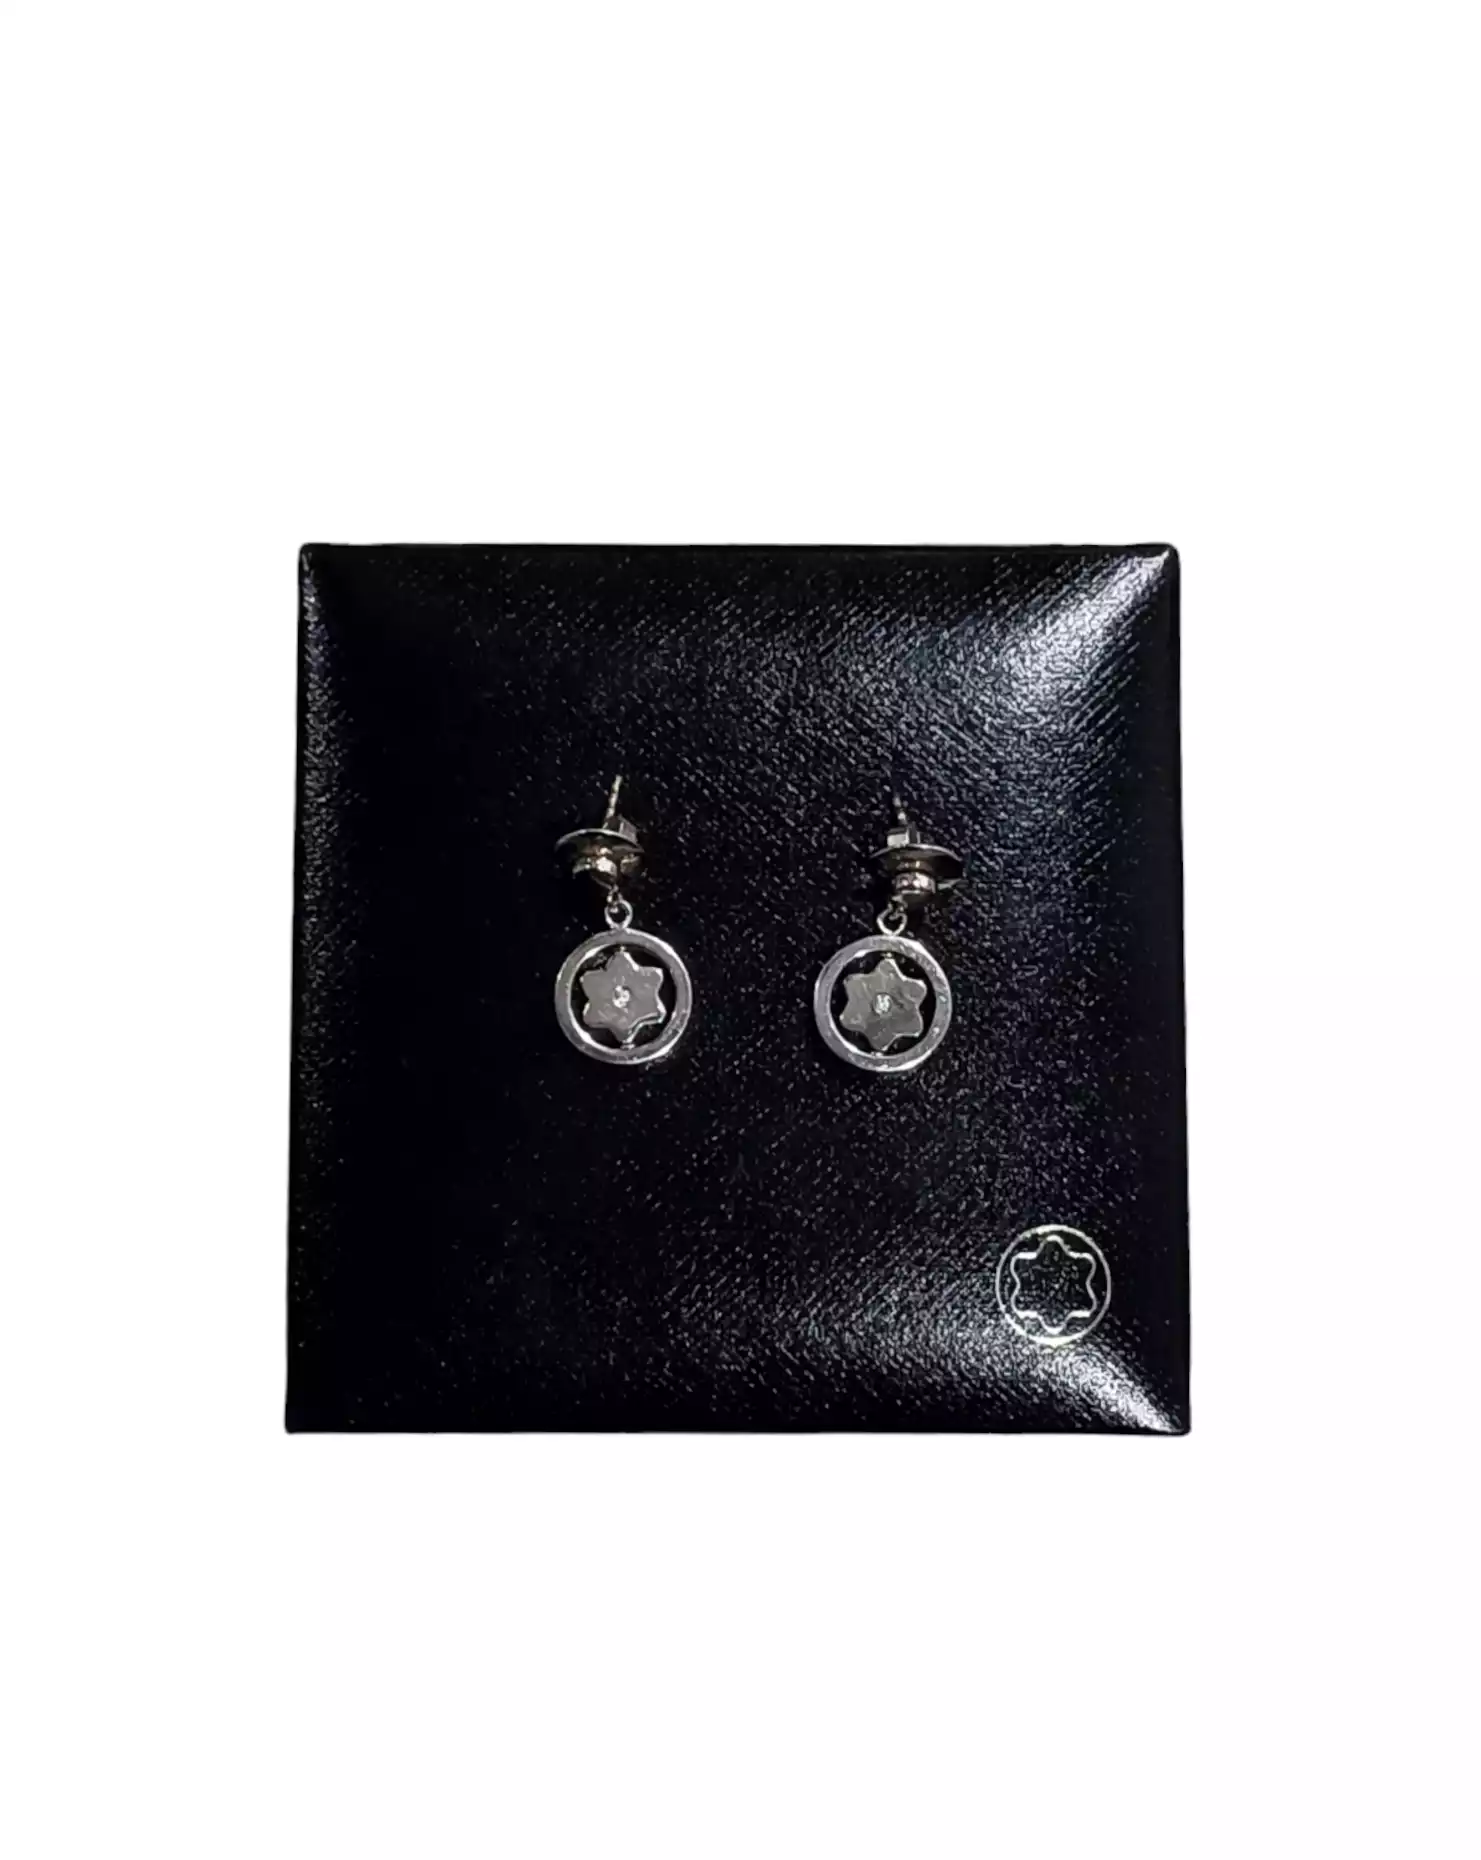 Earrings by Montblanc